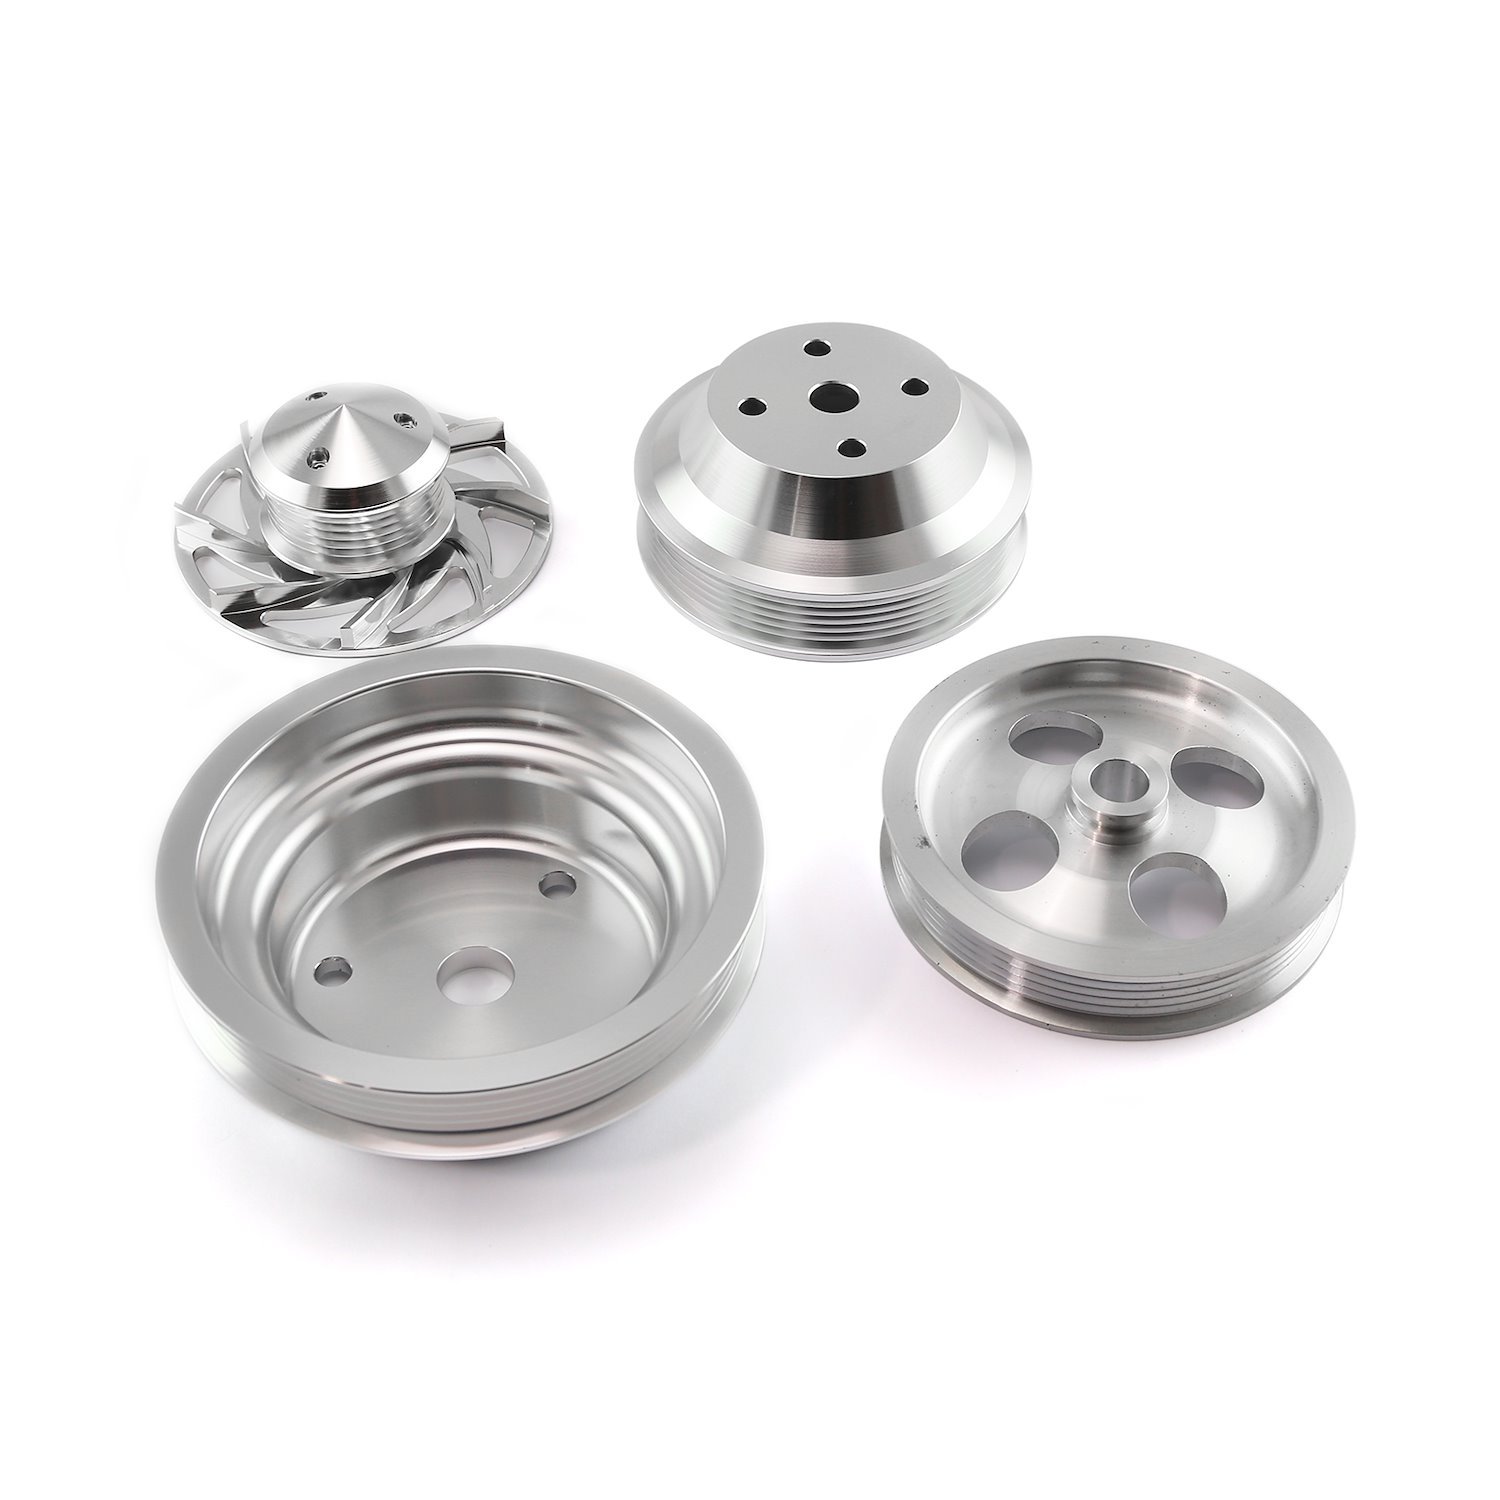 Billet Aluminum Serpentine Pulley Kit Small Block Chevy [Clear Anodized]